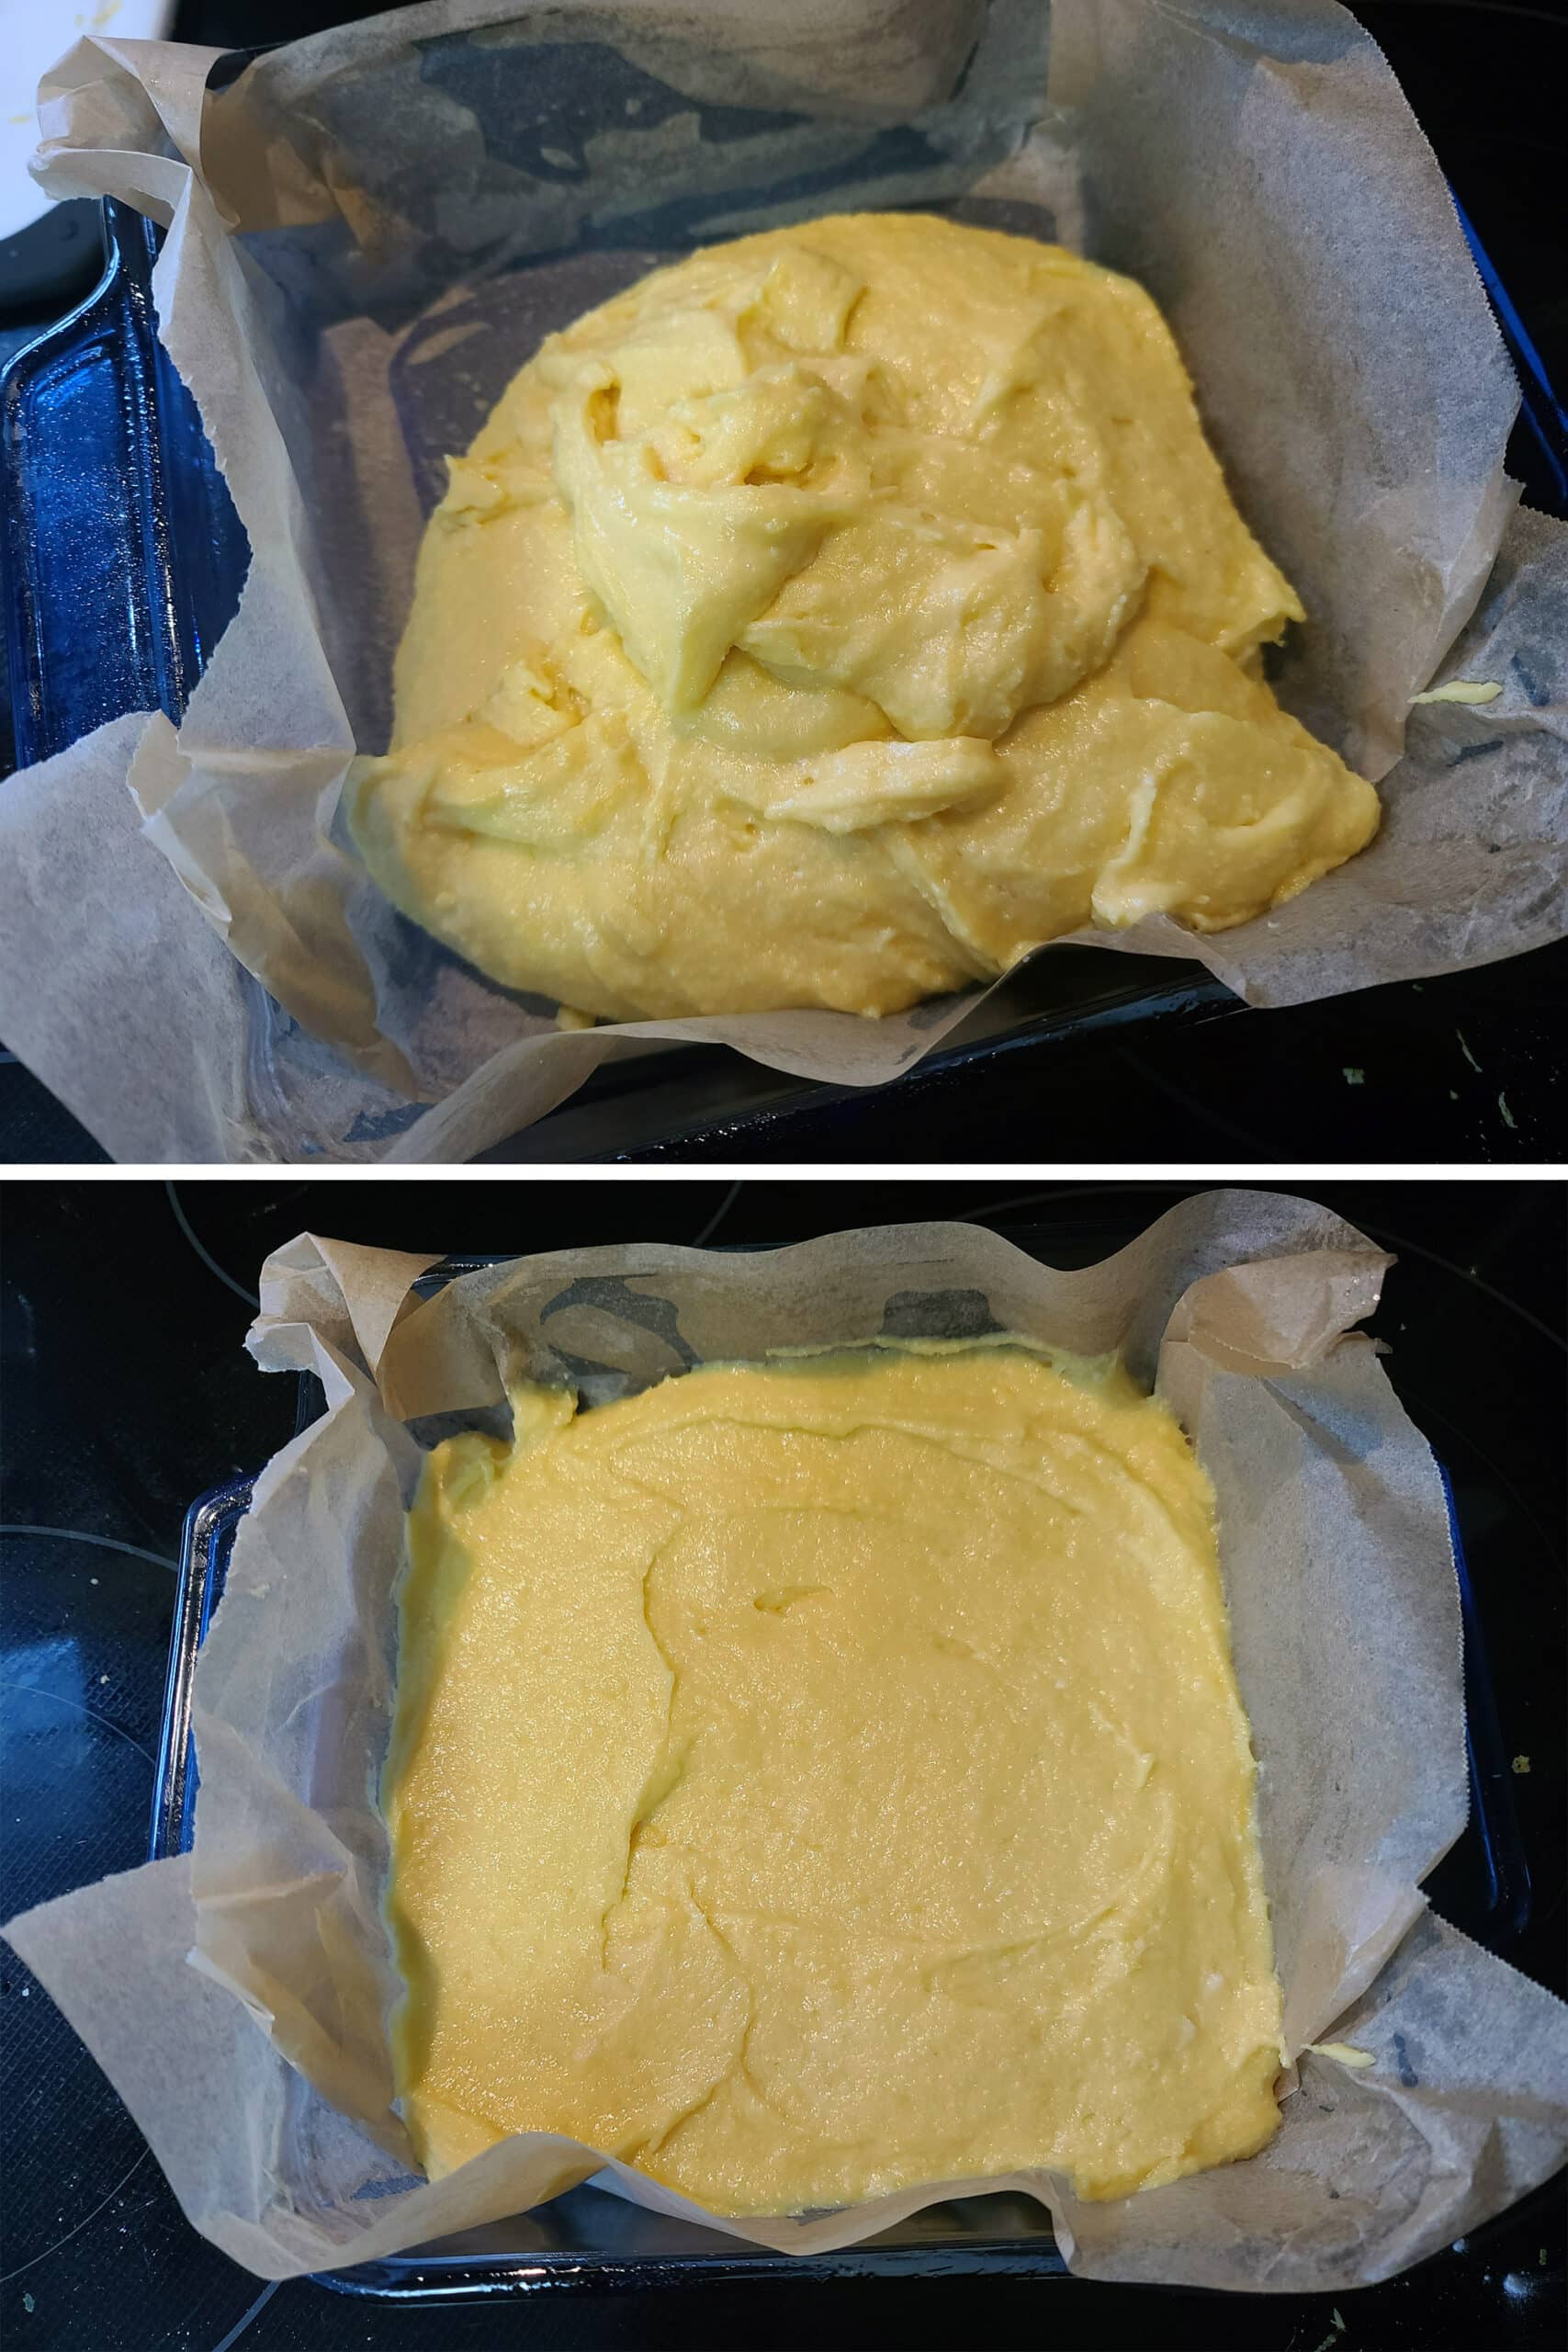 2 part image showing the lemon bar batter being spread in a lined baking pan.